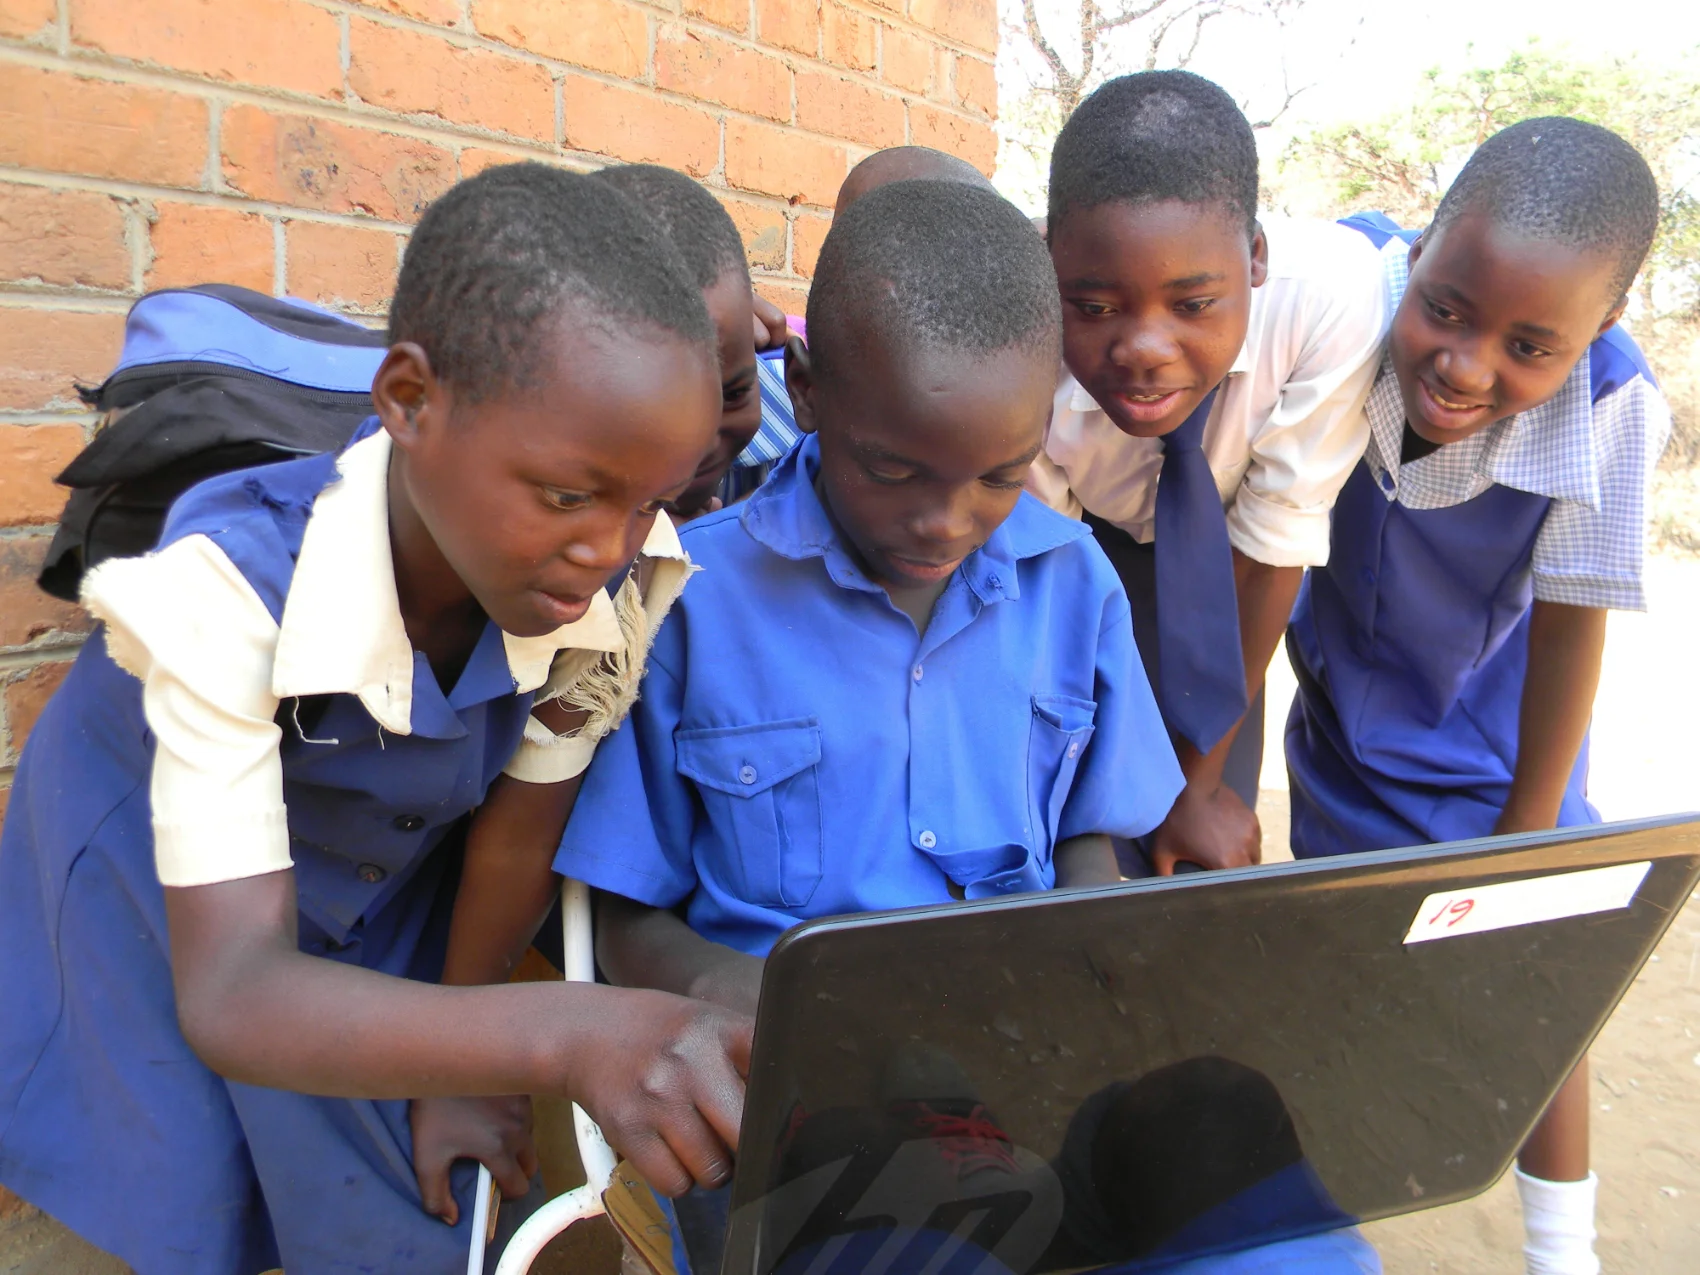 Primary schoolchildren in Africa work together on a laptop outside a school